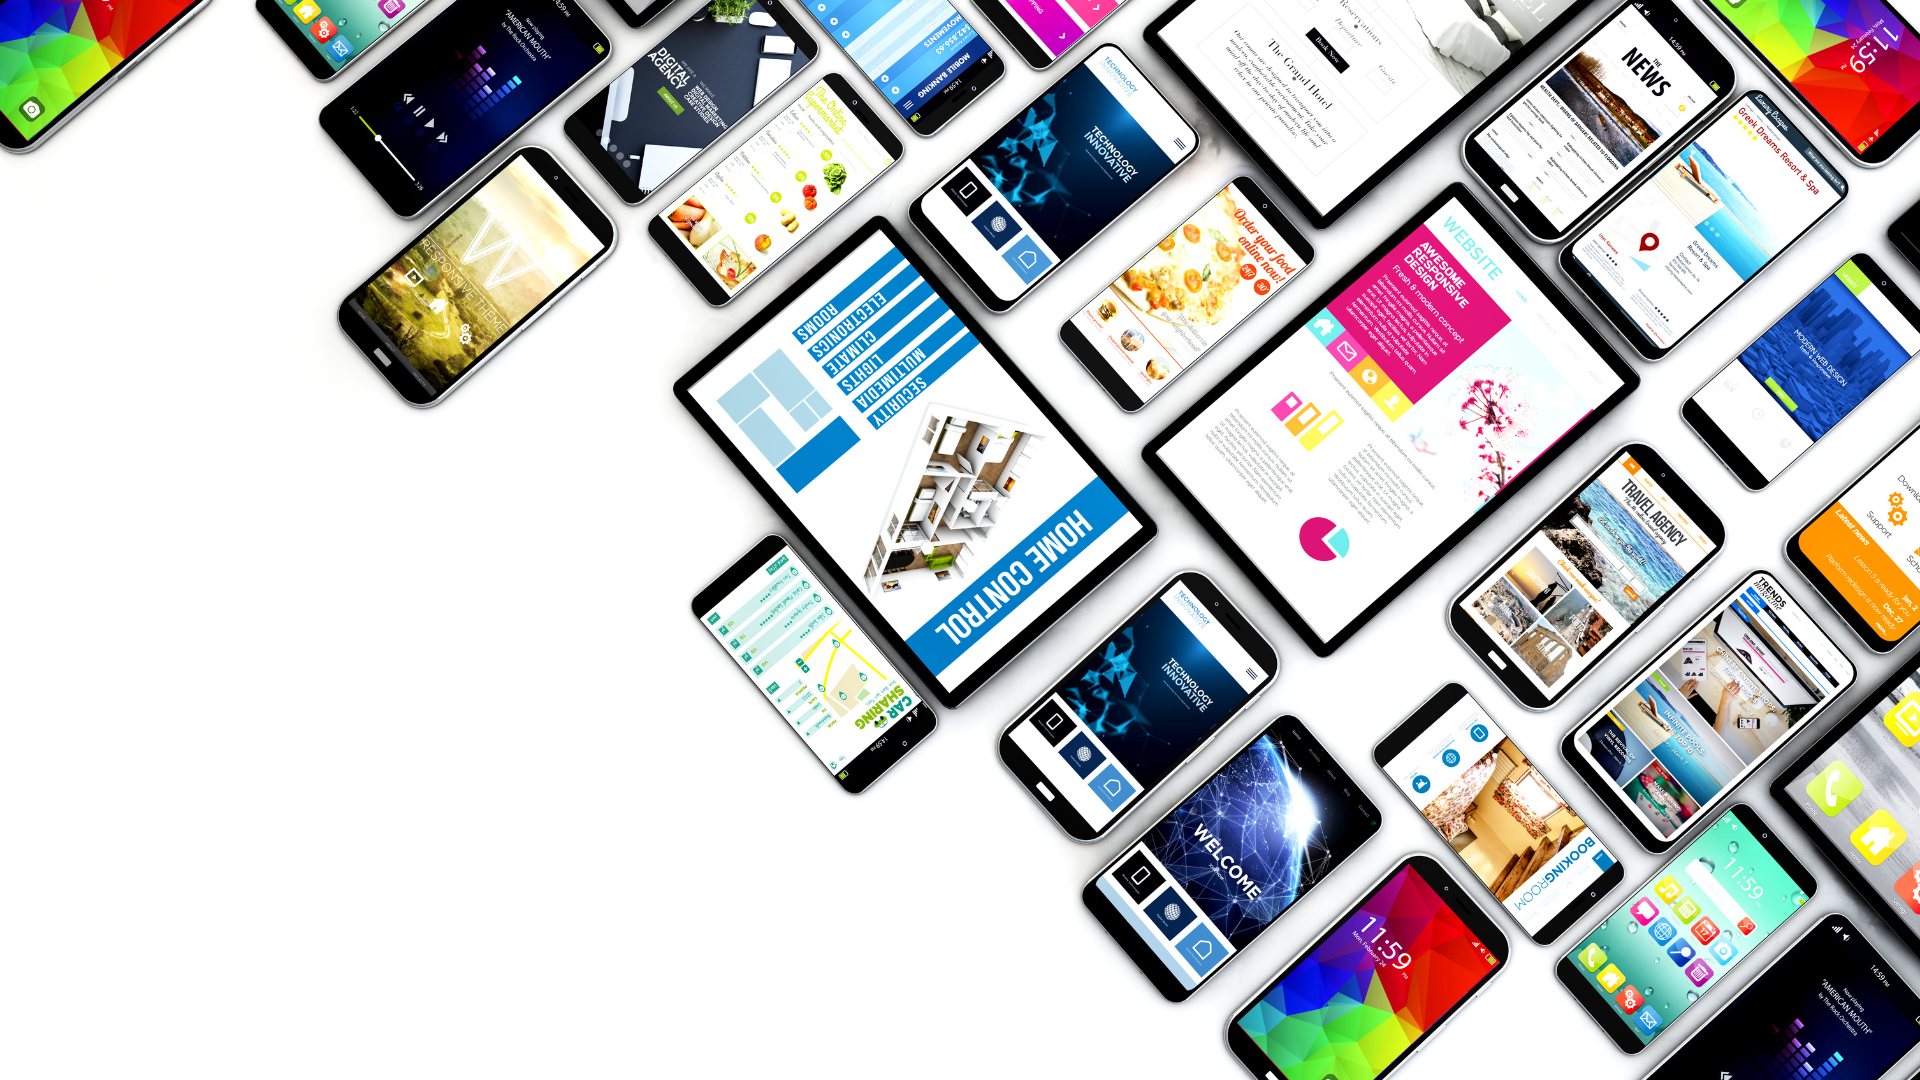 The image shows multiple mobile devices